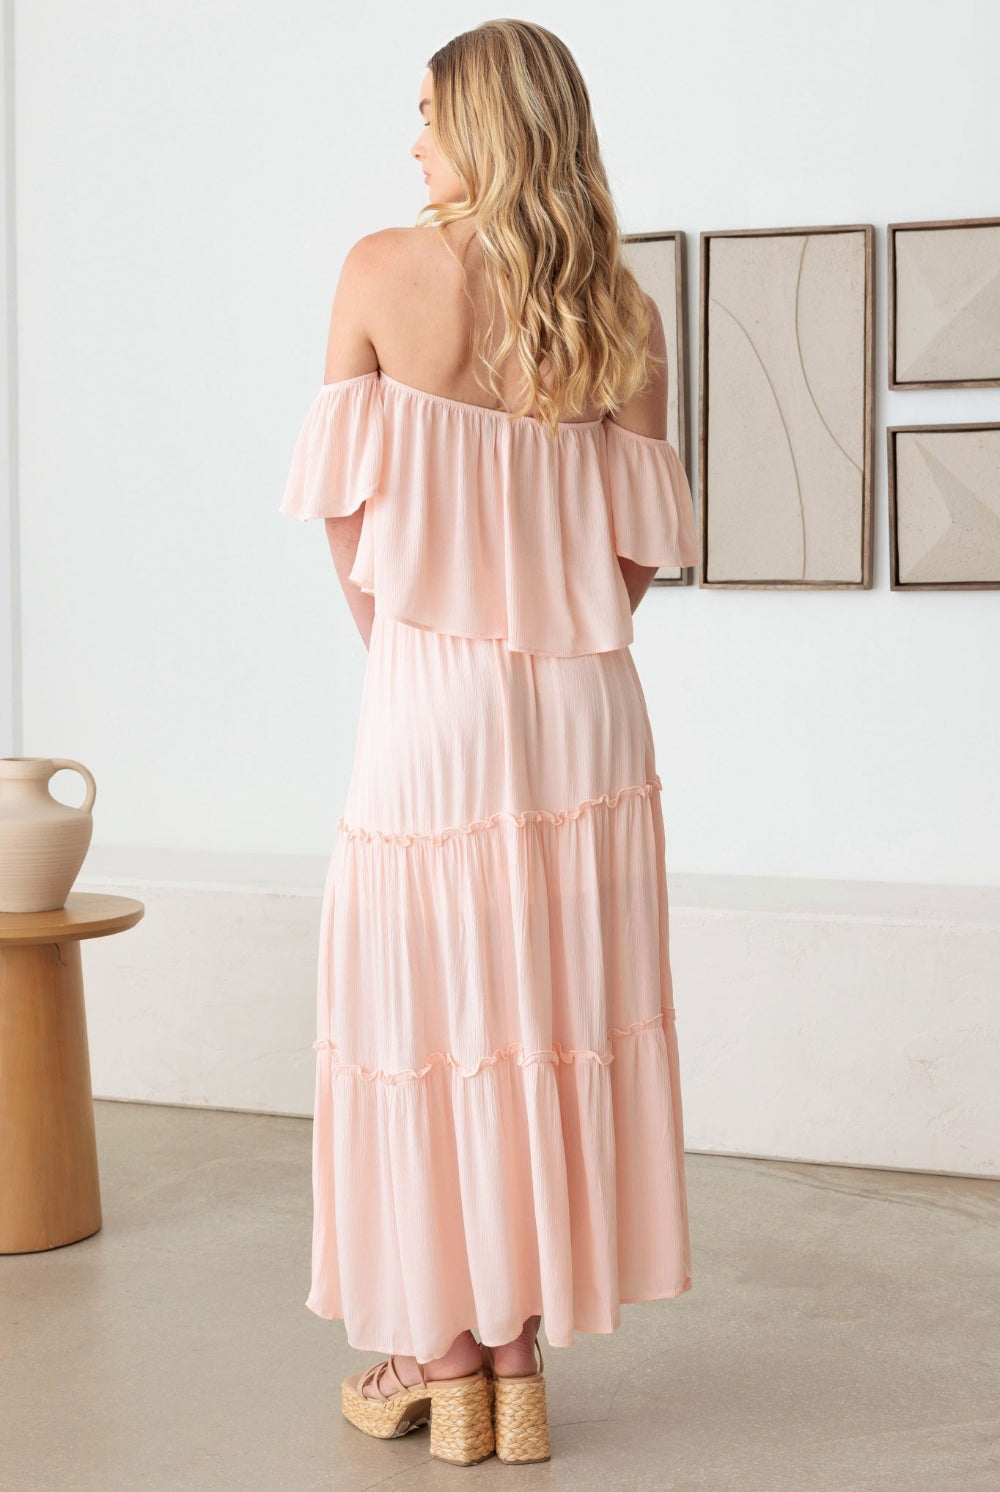 Elegant blush tiered dress with an off shoulder design and frill detailing, perfect for any occasion.